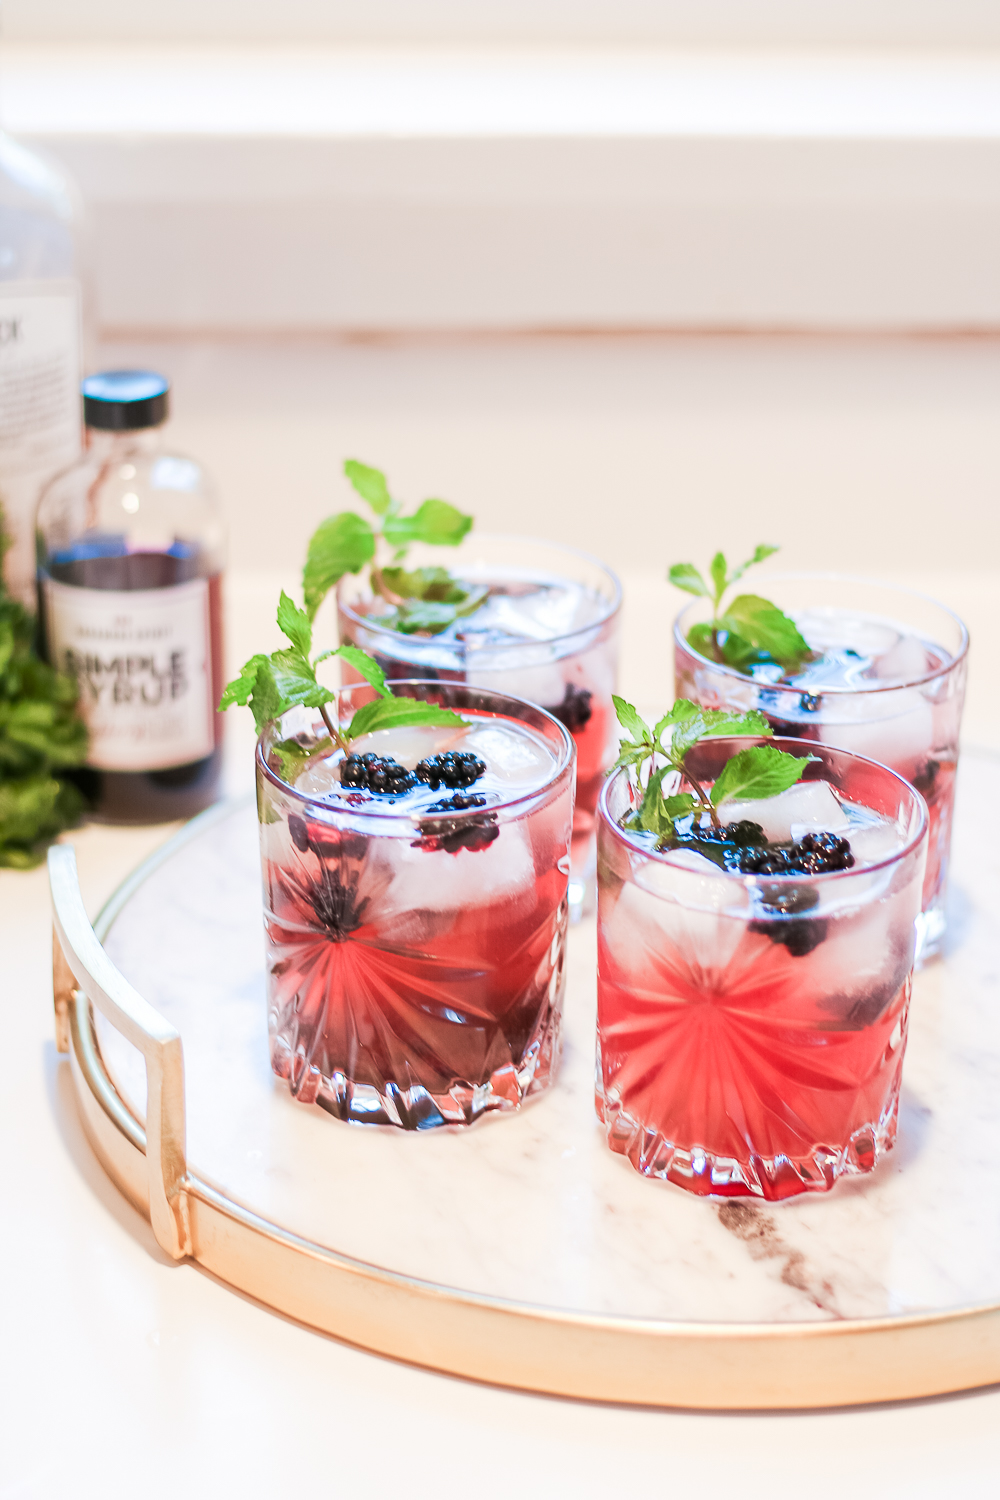 Preakness-Approved Blackberry Whiskey Cocktail: Black-Eyed Rye by southern lifestyle blogger Stephanie Ziajka from Diary of a Debutante, blackberry cocktail recipes, Sagamore Spirit Black-Eyed Rye recipe, Derby Day drink recipes